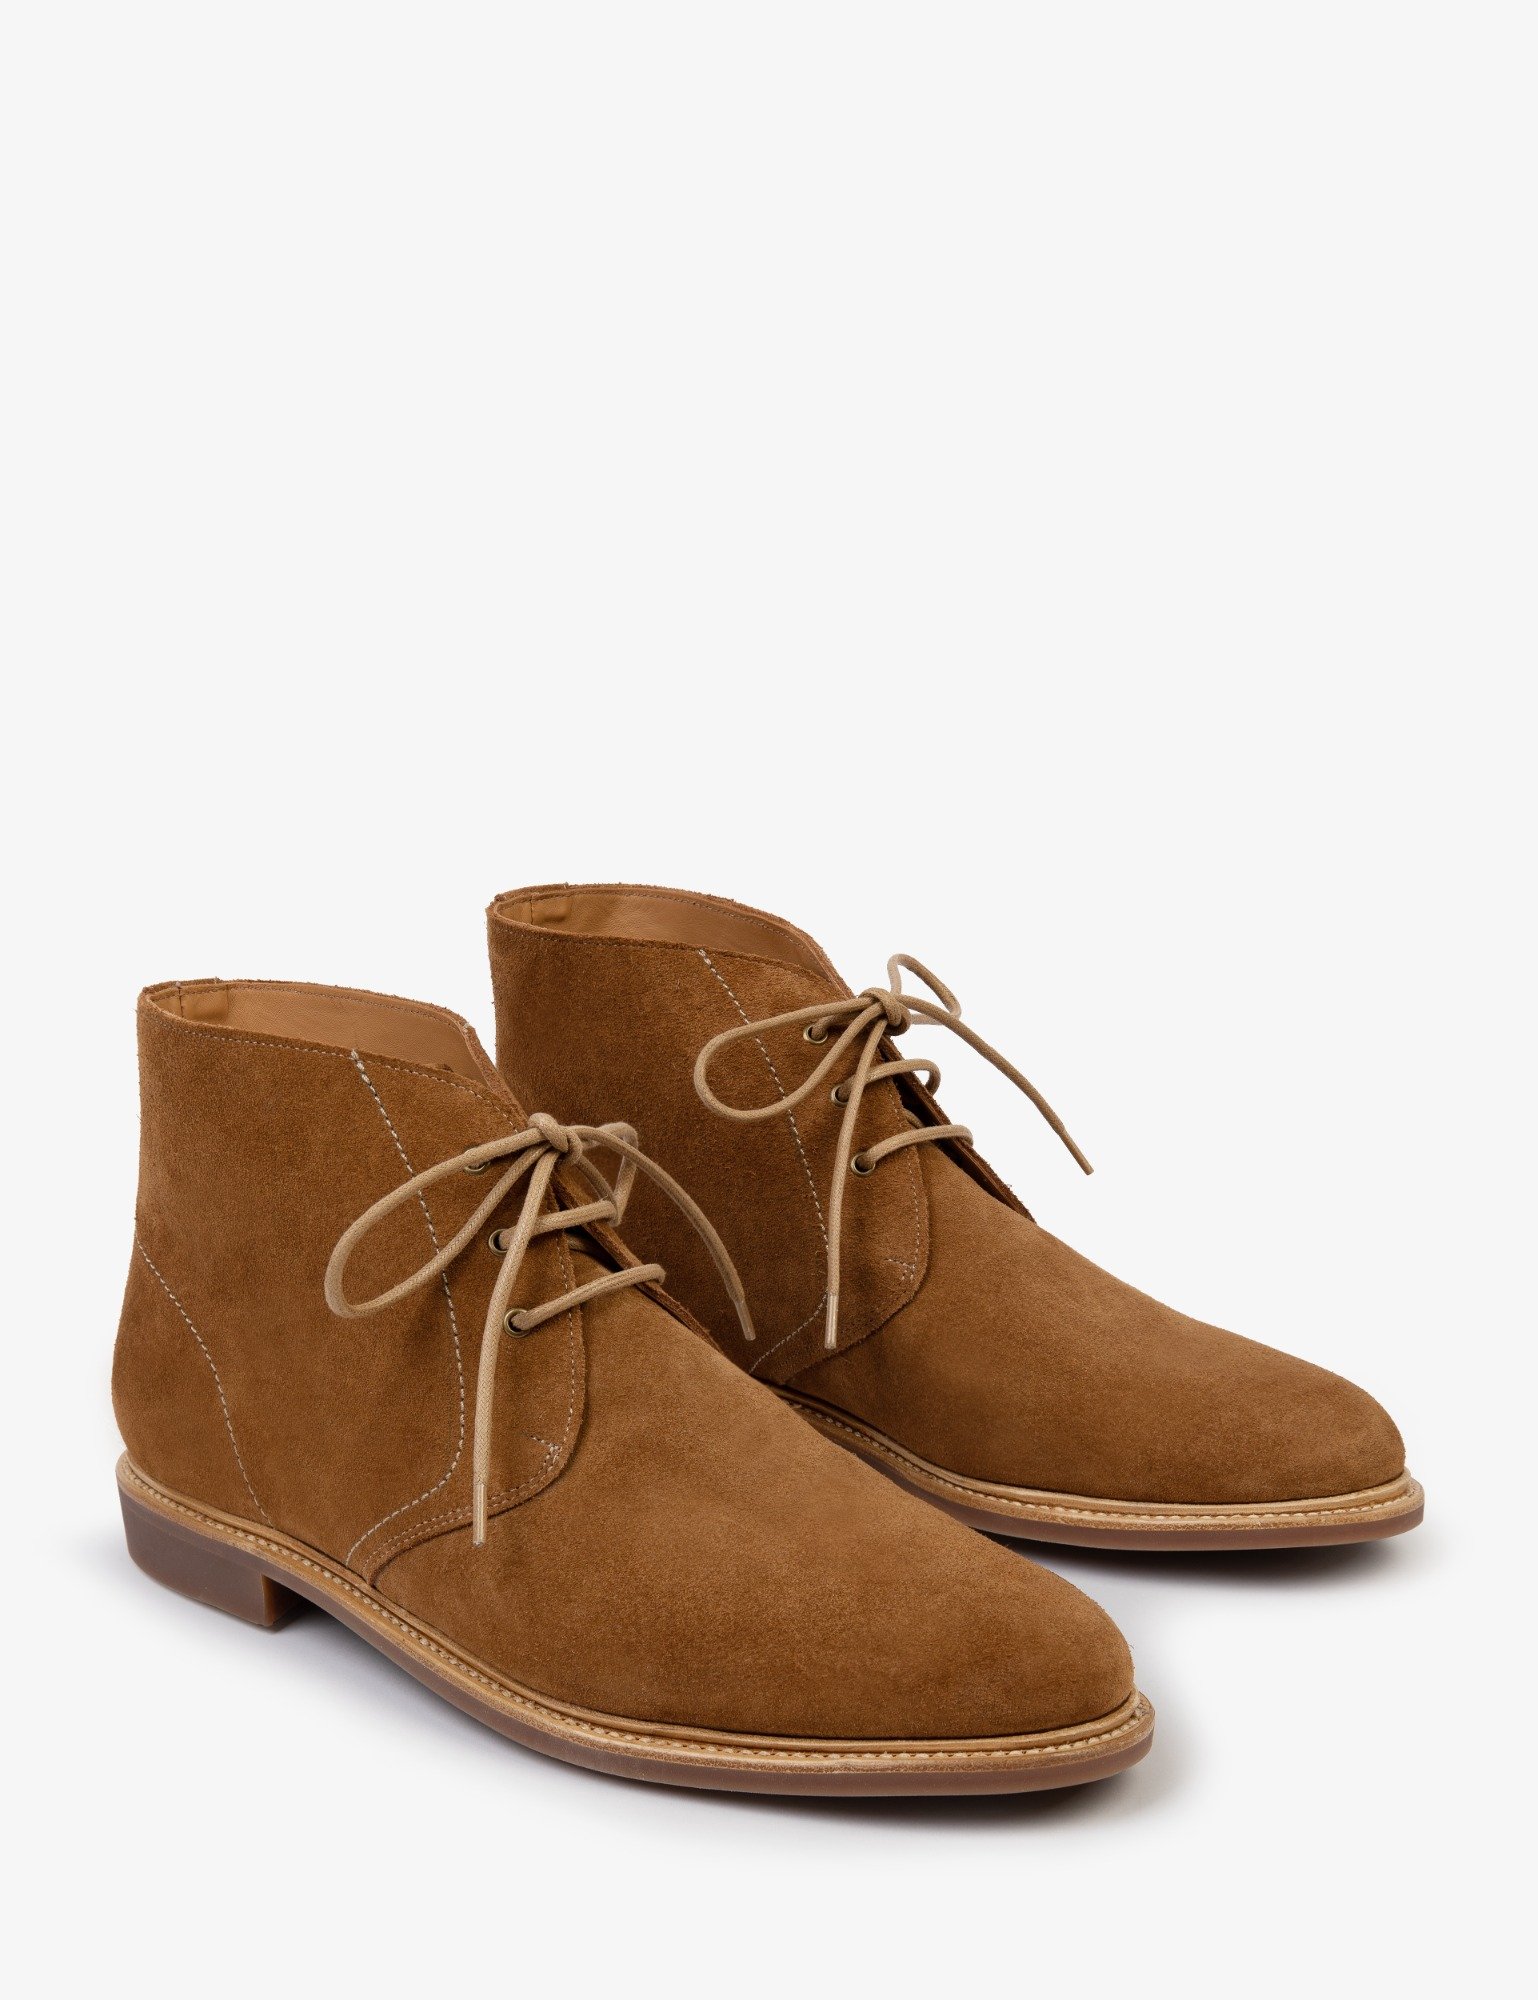 Hastings Suede Chukka Boot-tan | Men's Boot|Penelope Chilvers